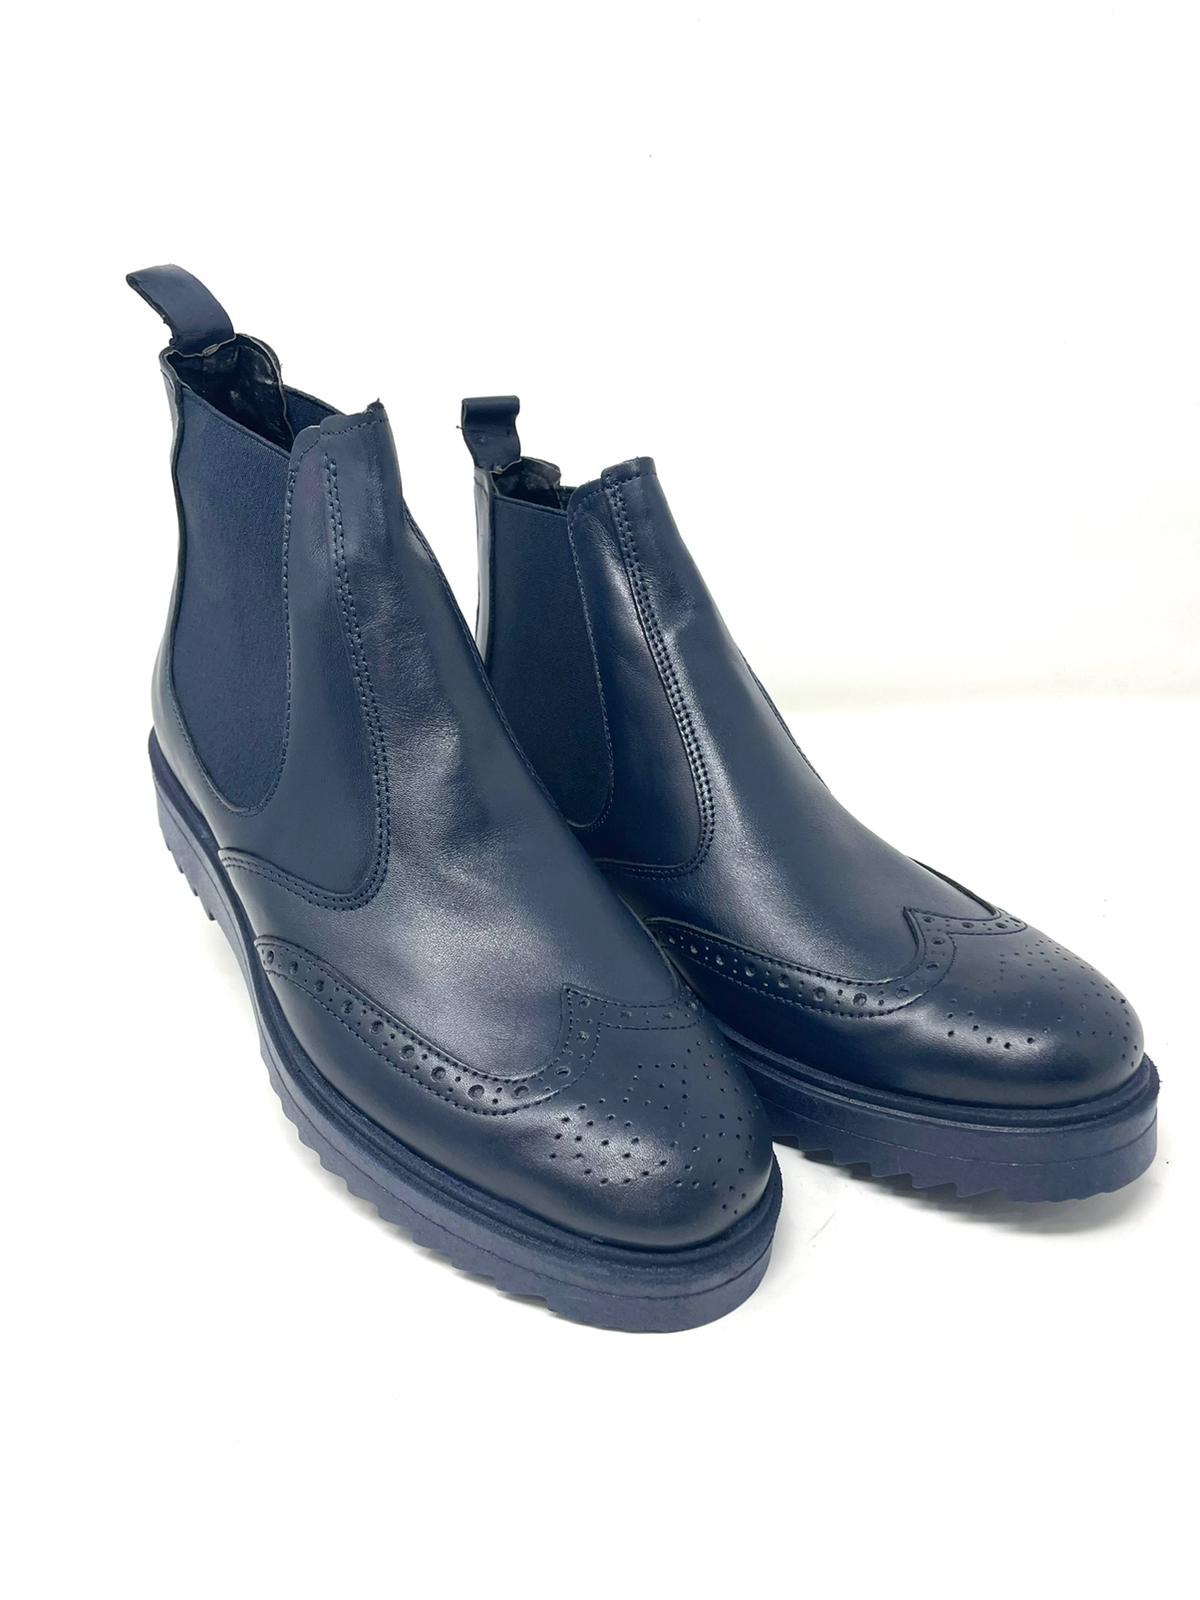 Beatles ankle boot with monogram in genuine leather made in Italy with wedge sole